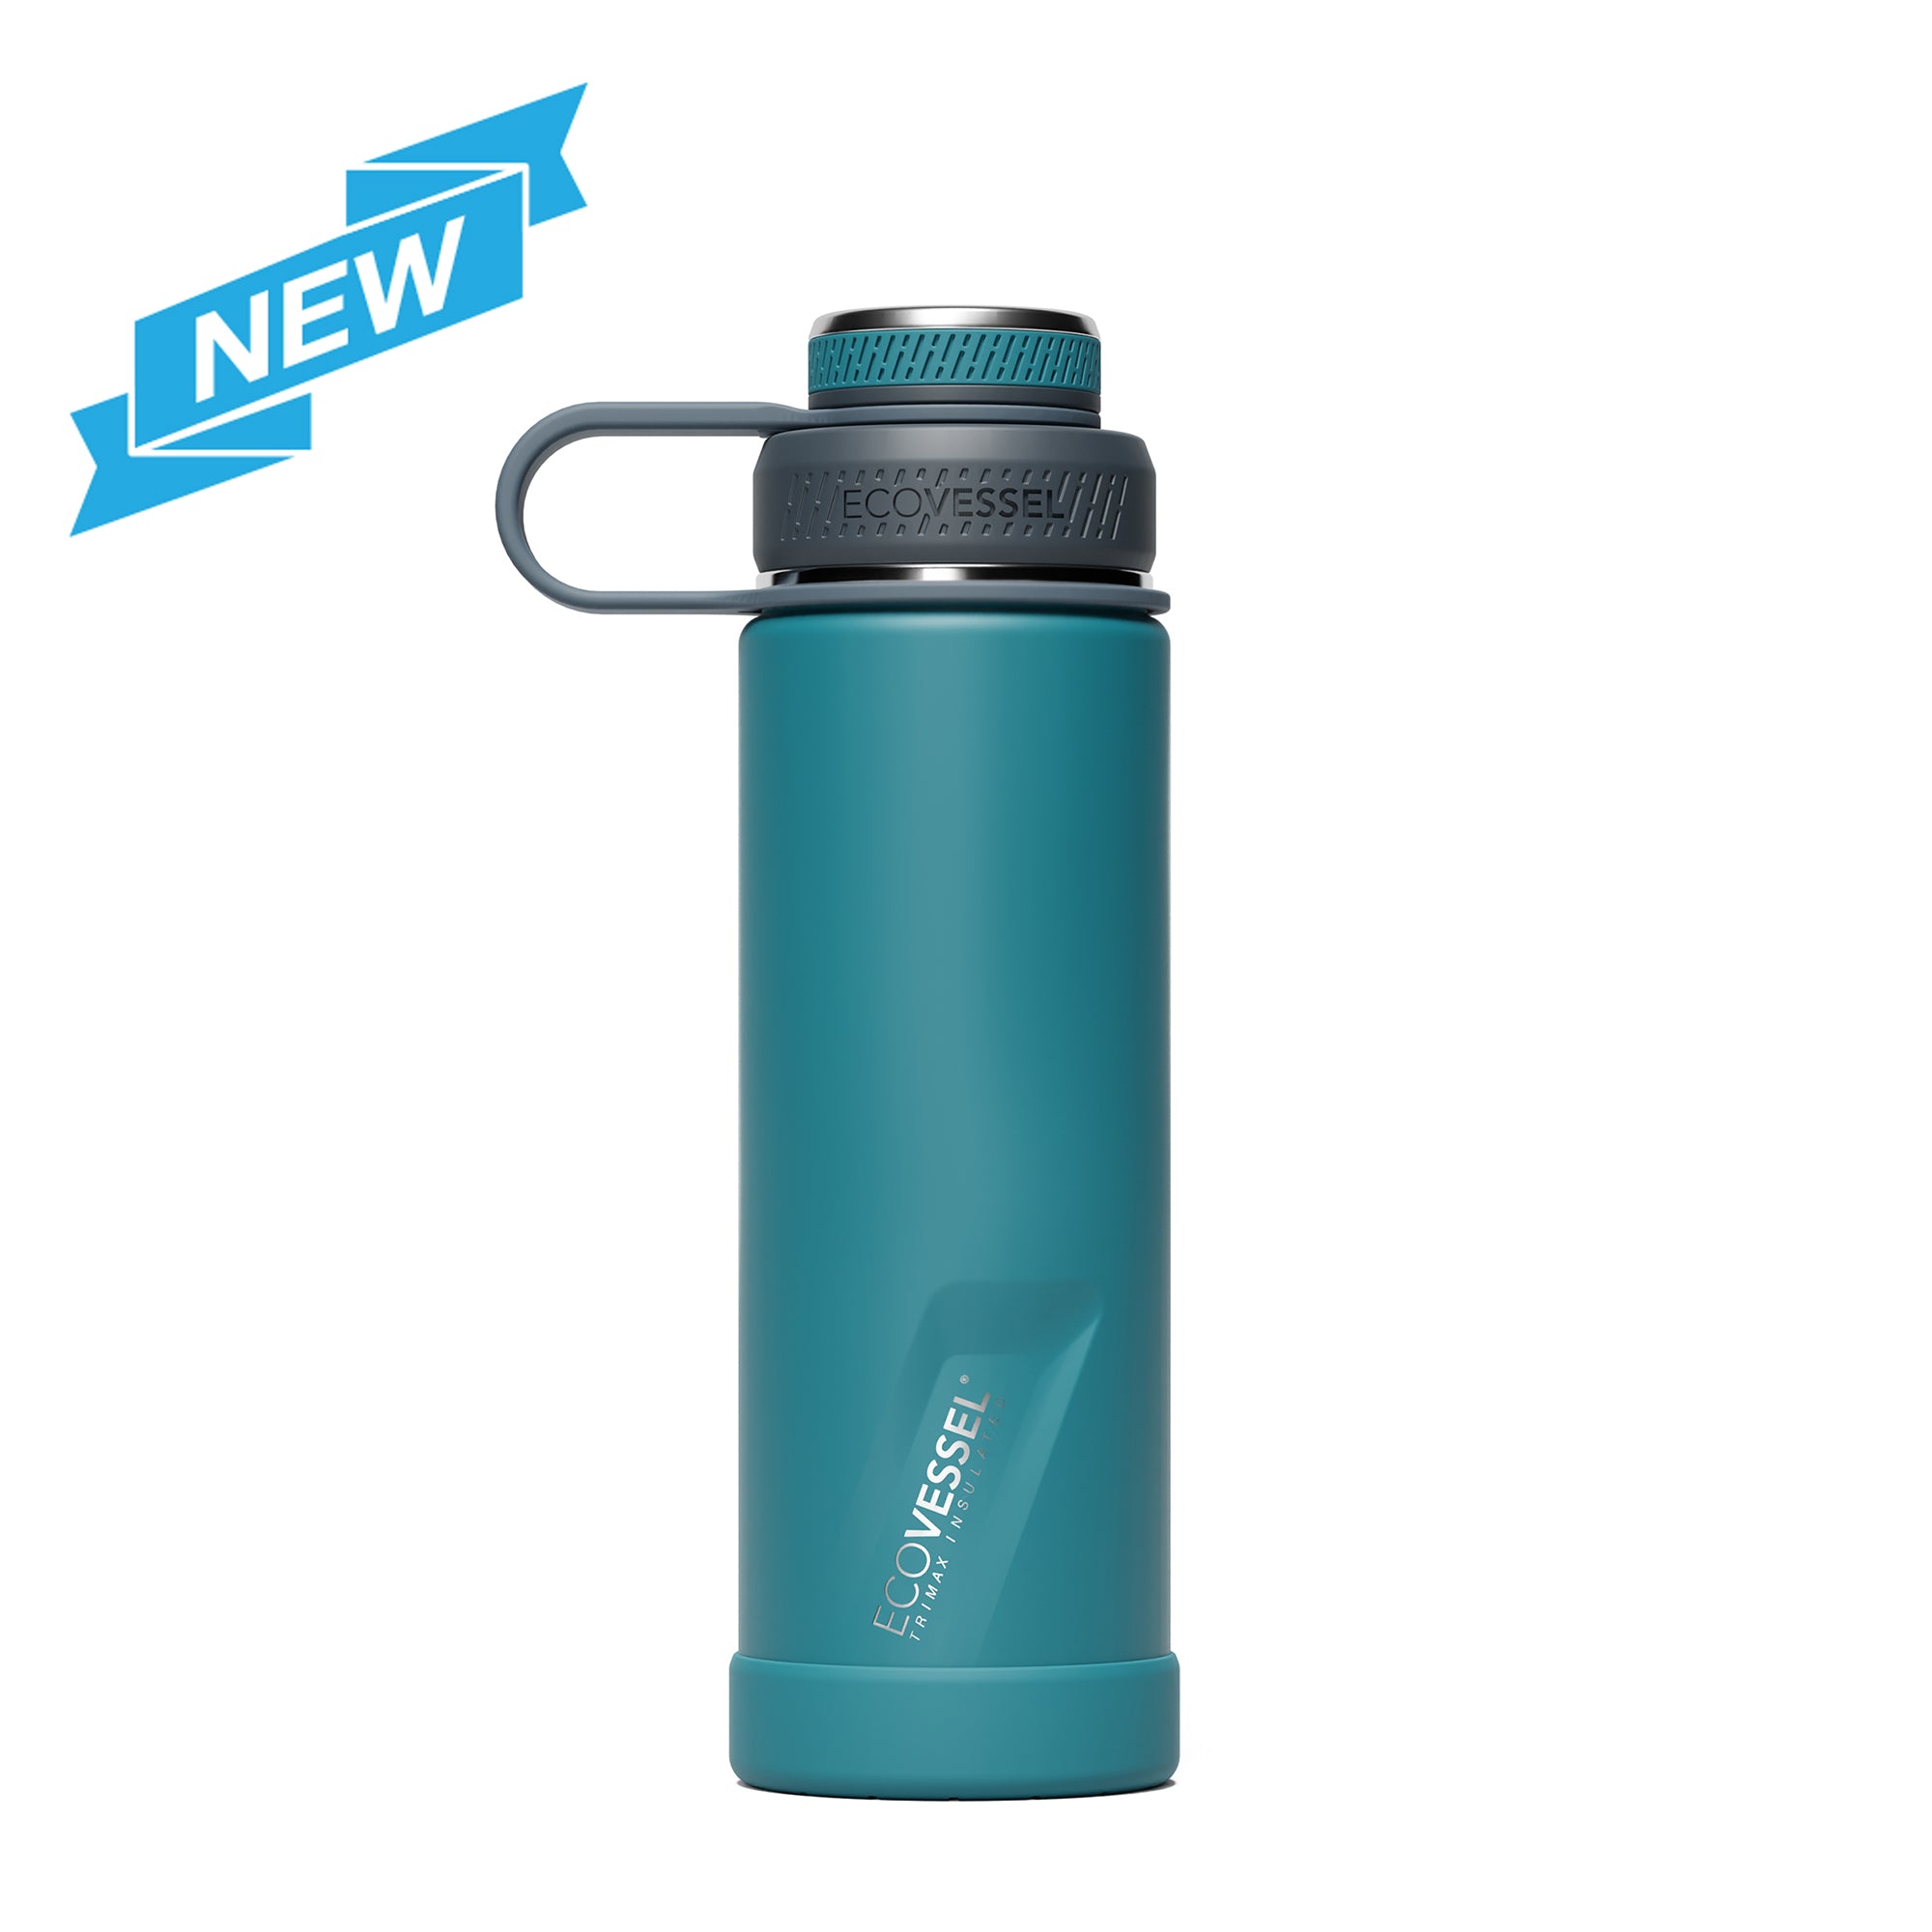 Best Insulated Water Bottle: Guide to the Best Bottles - Go Green Travel  Green